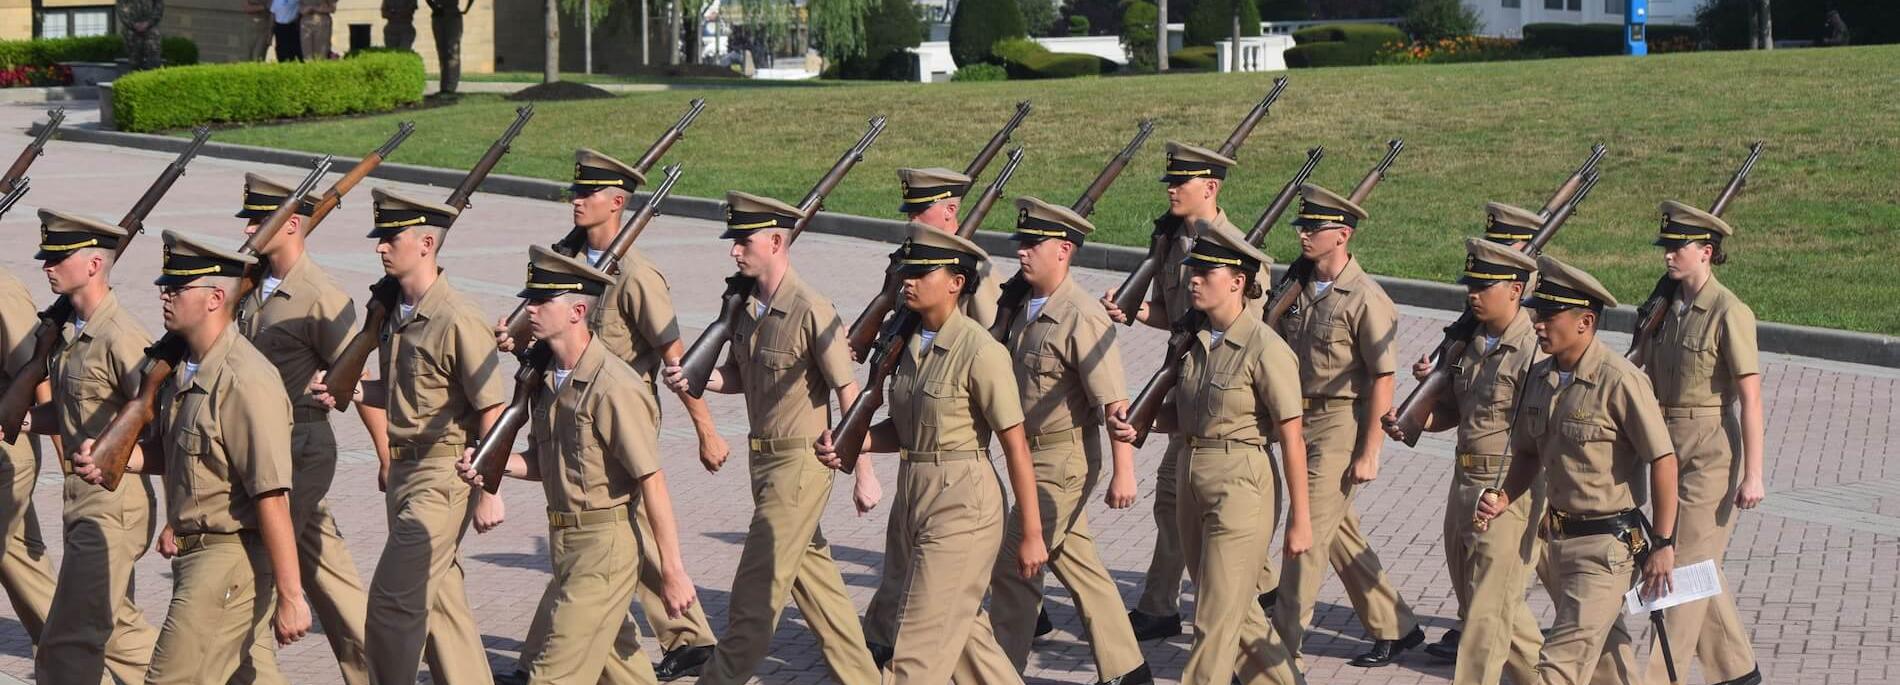 Cadets marching in formation